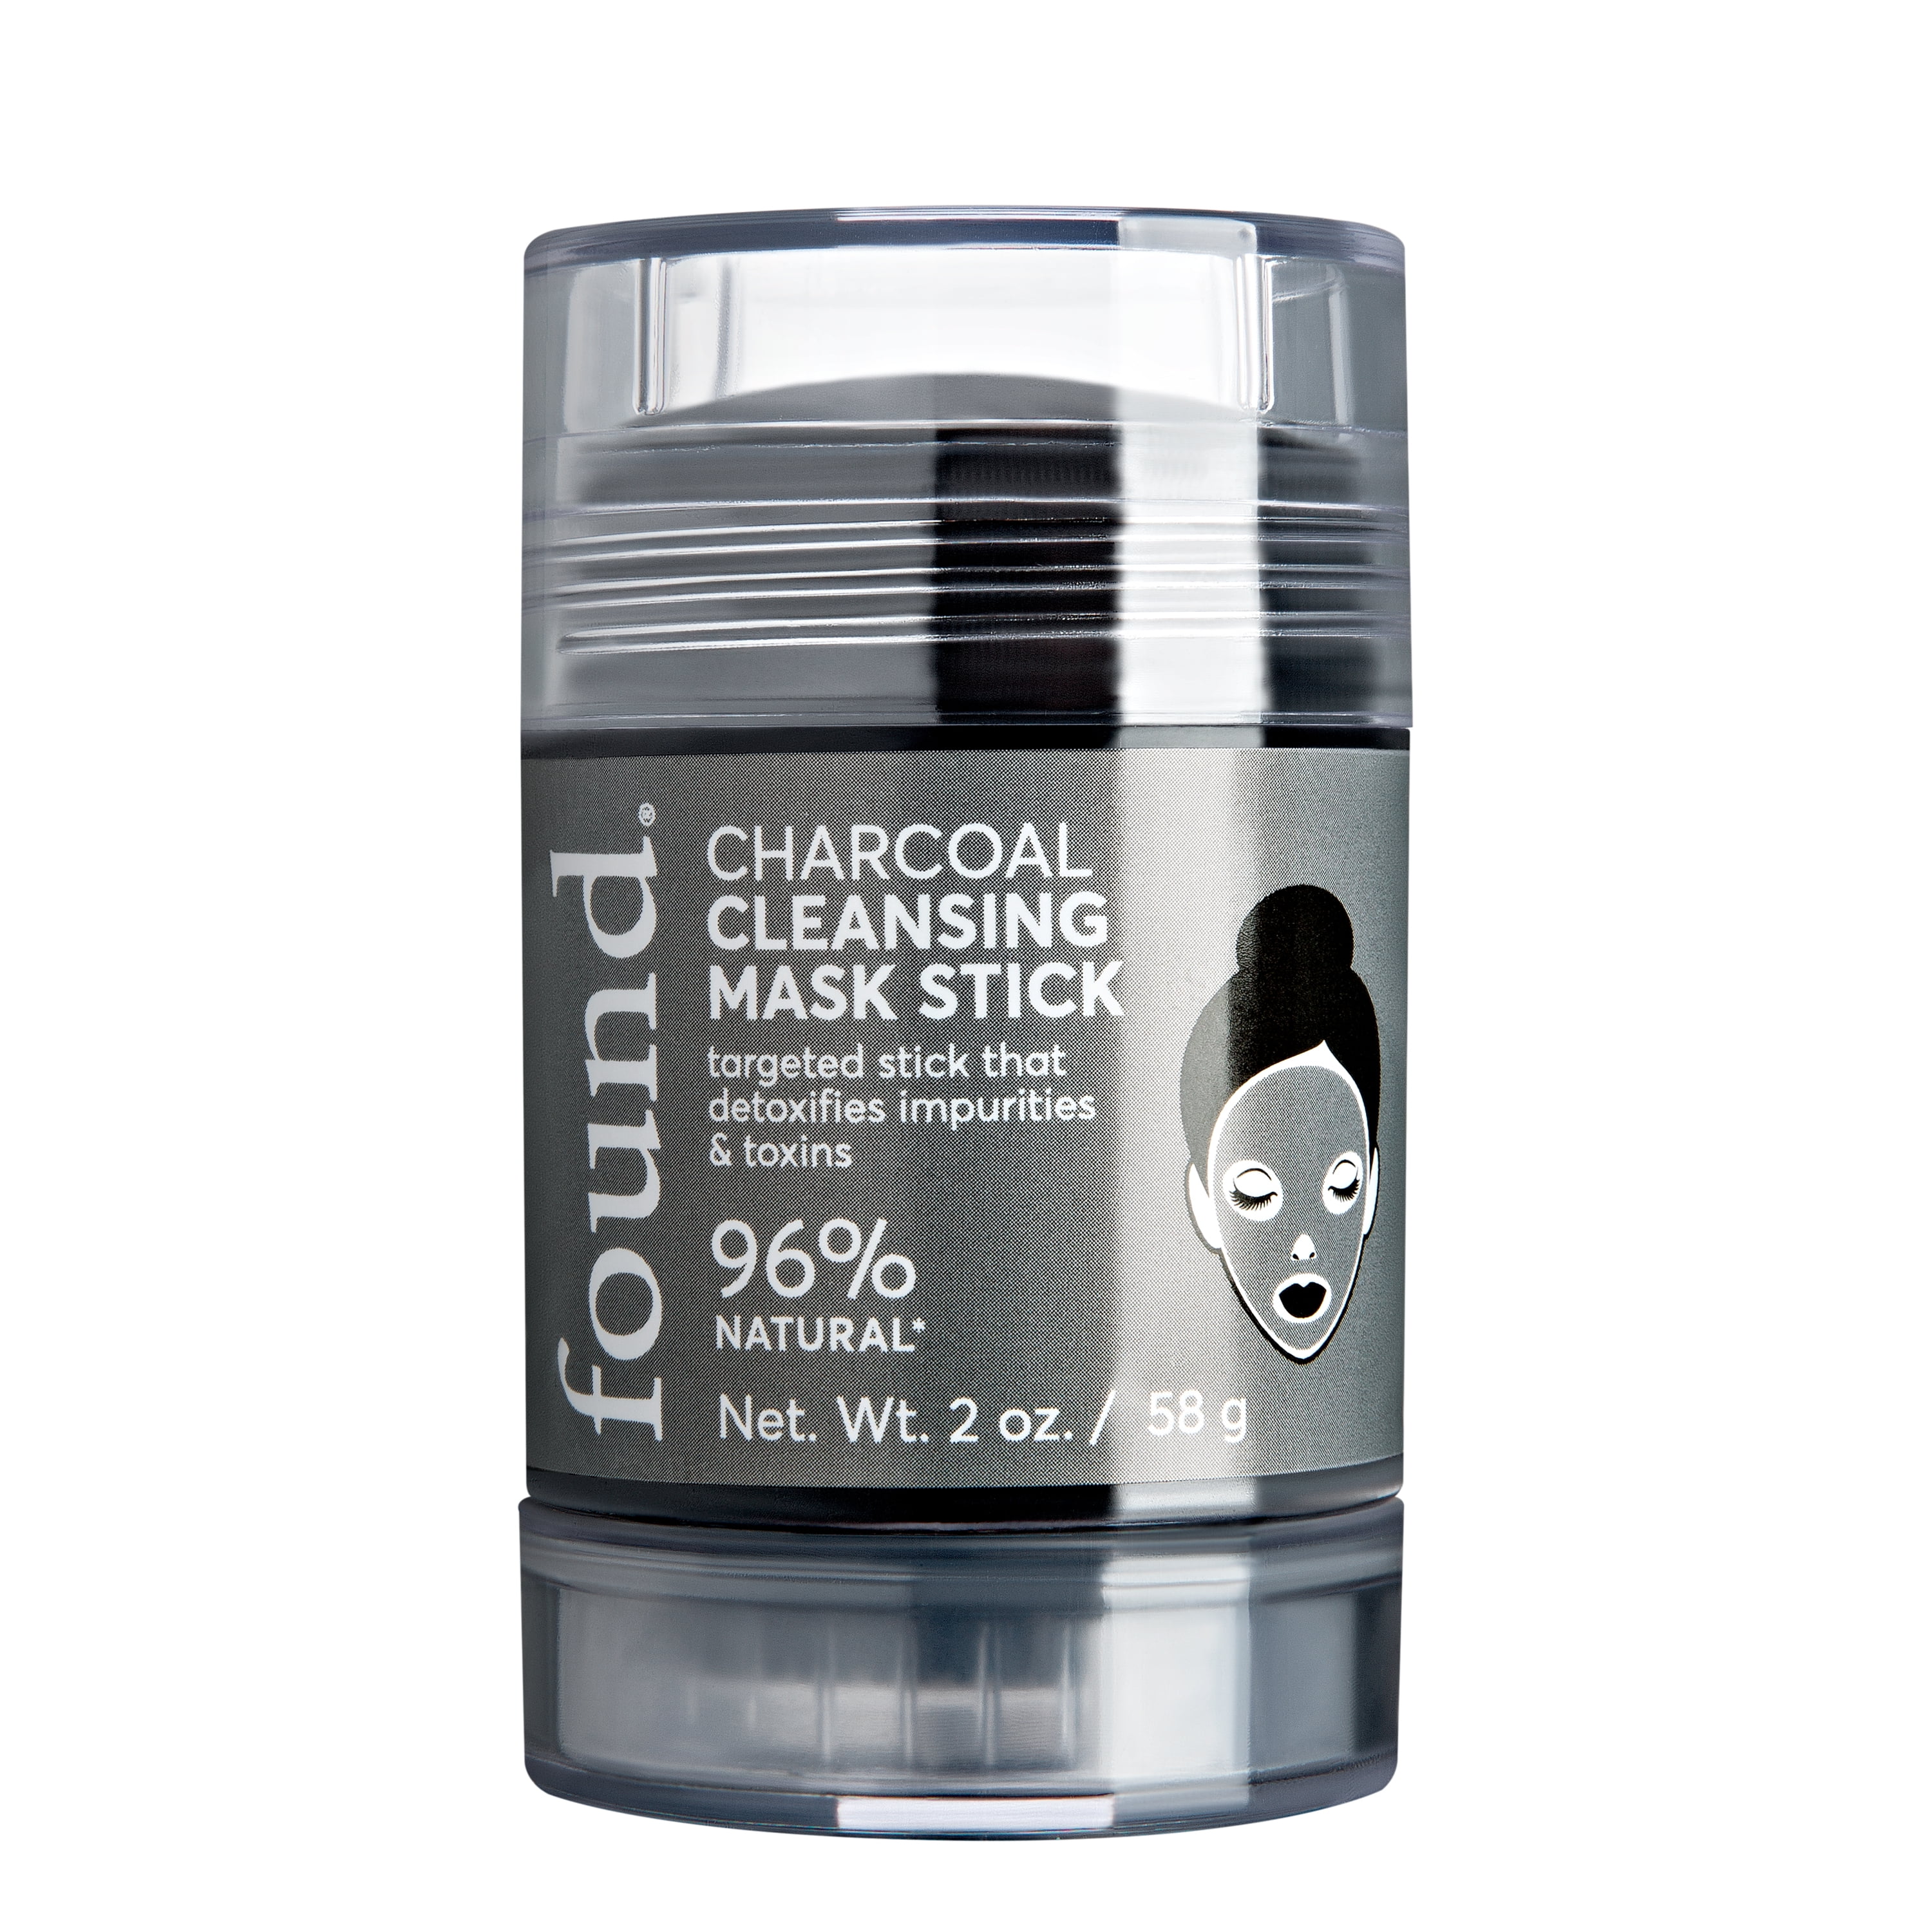 found Charcoal Cleansing Mask Stick 96% Natural, 2 oz